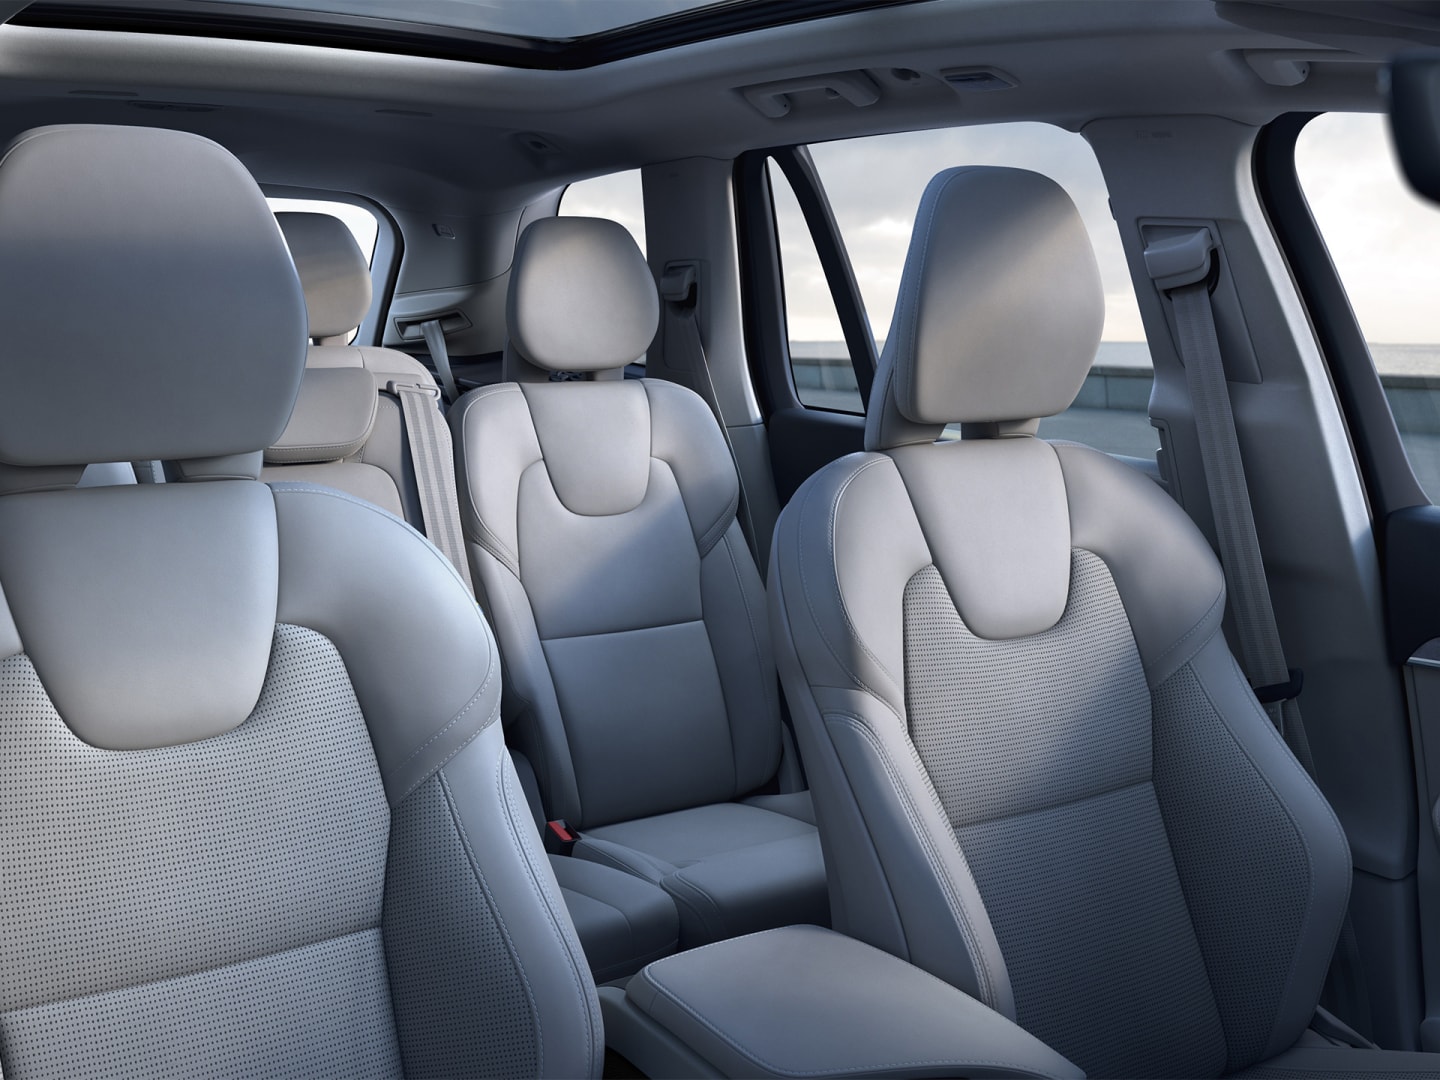 Roomy and luxurious cabin interior of Volvo XC90 SUV.